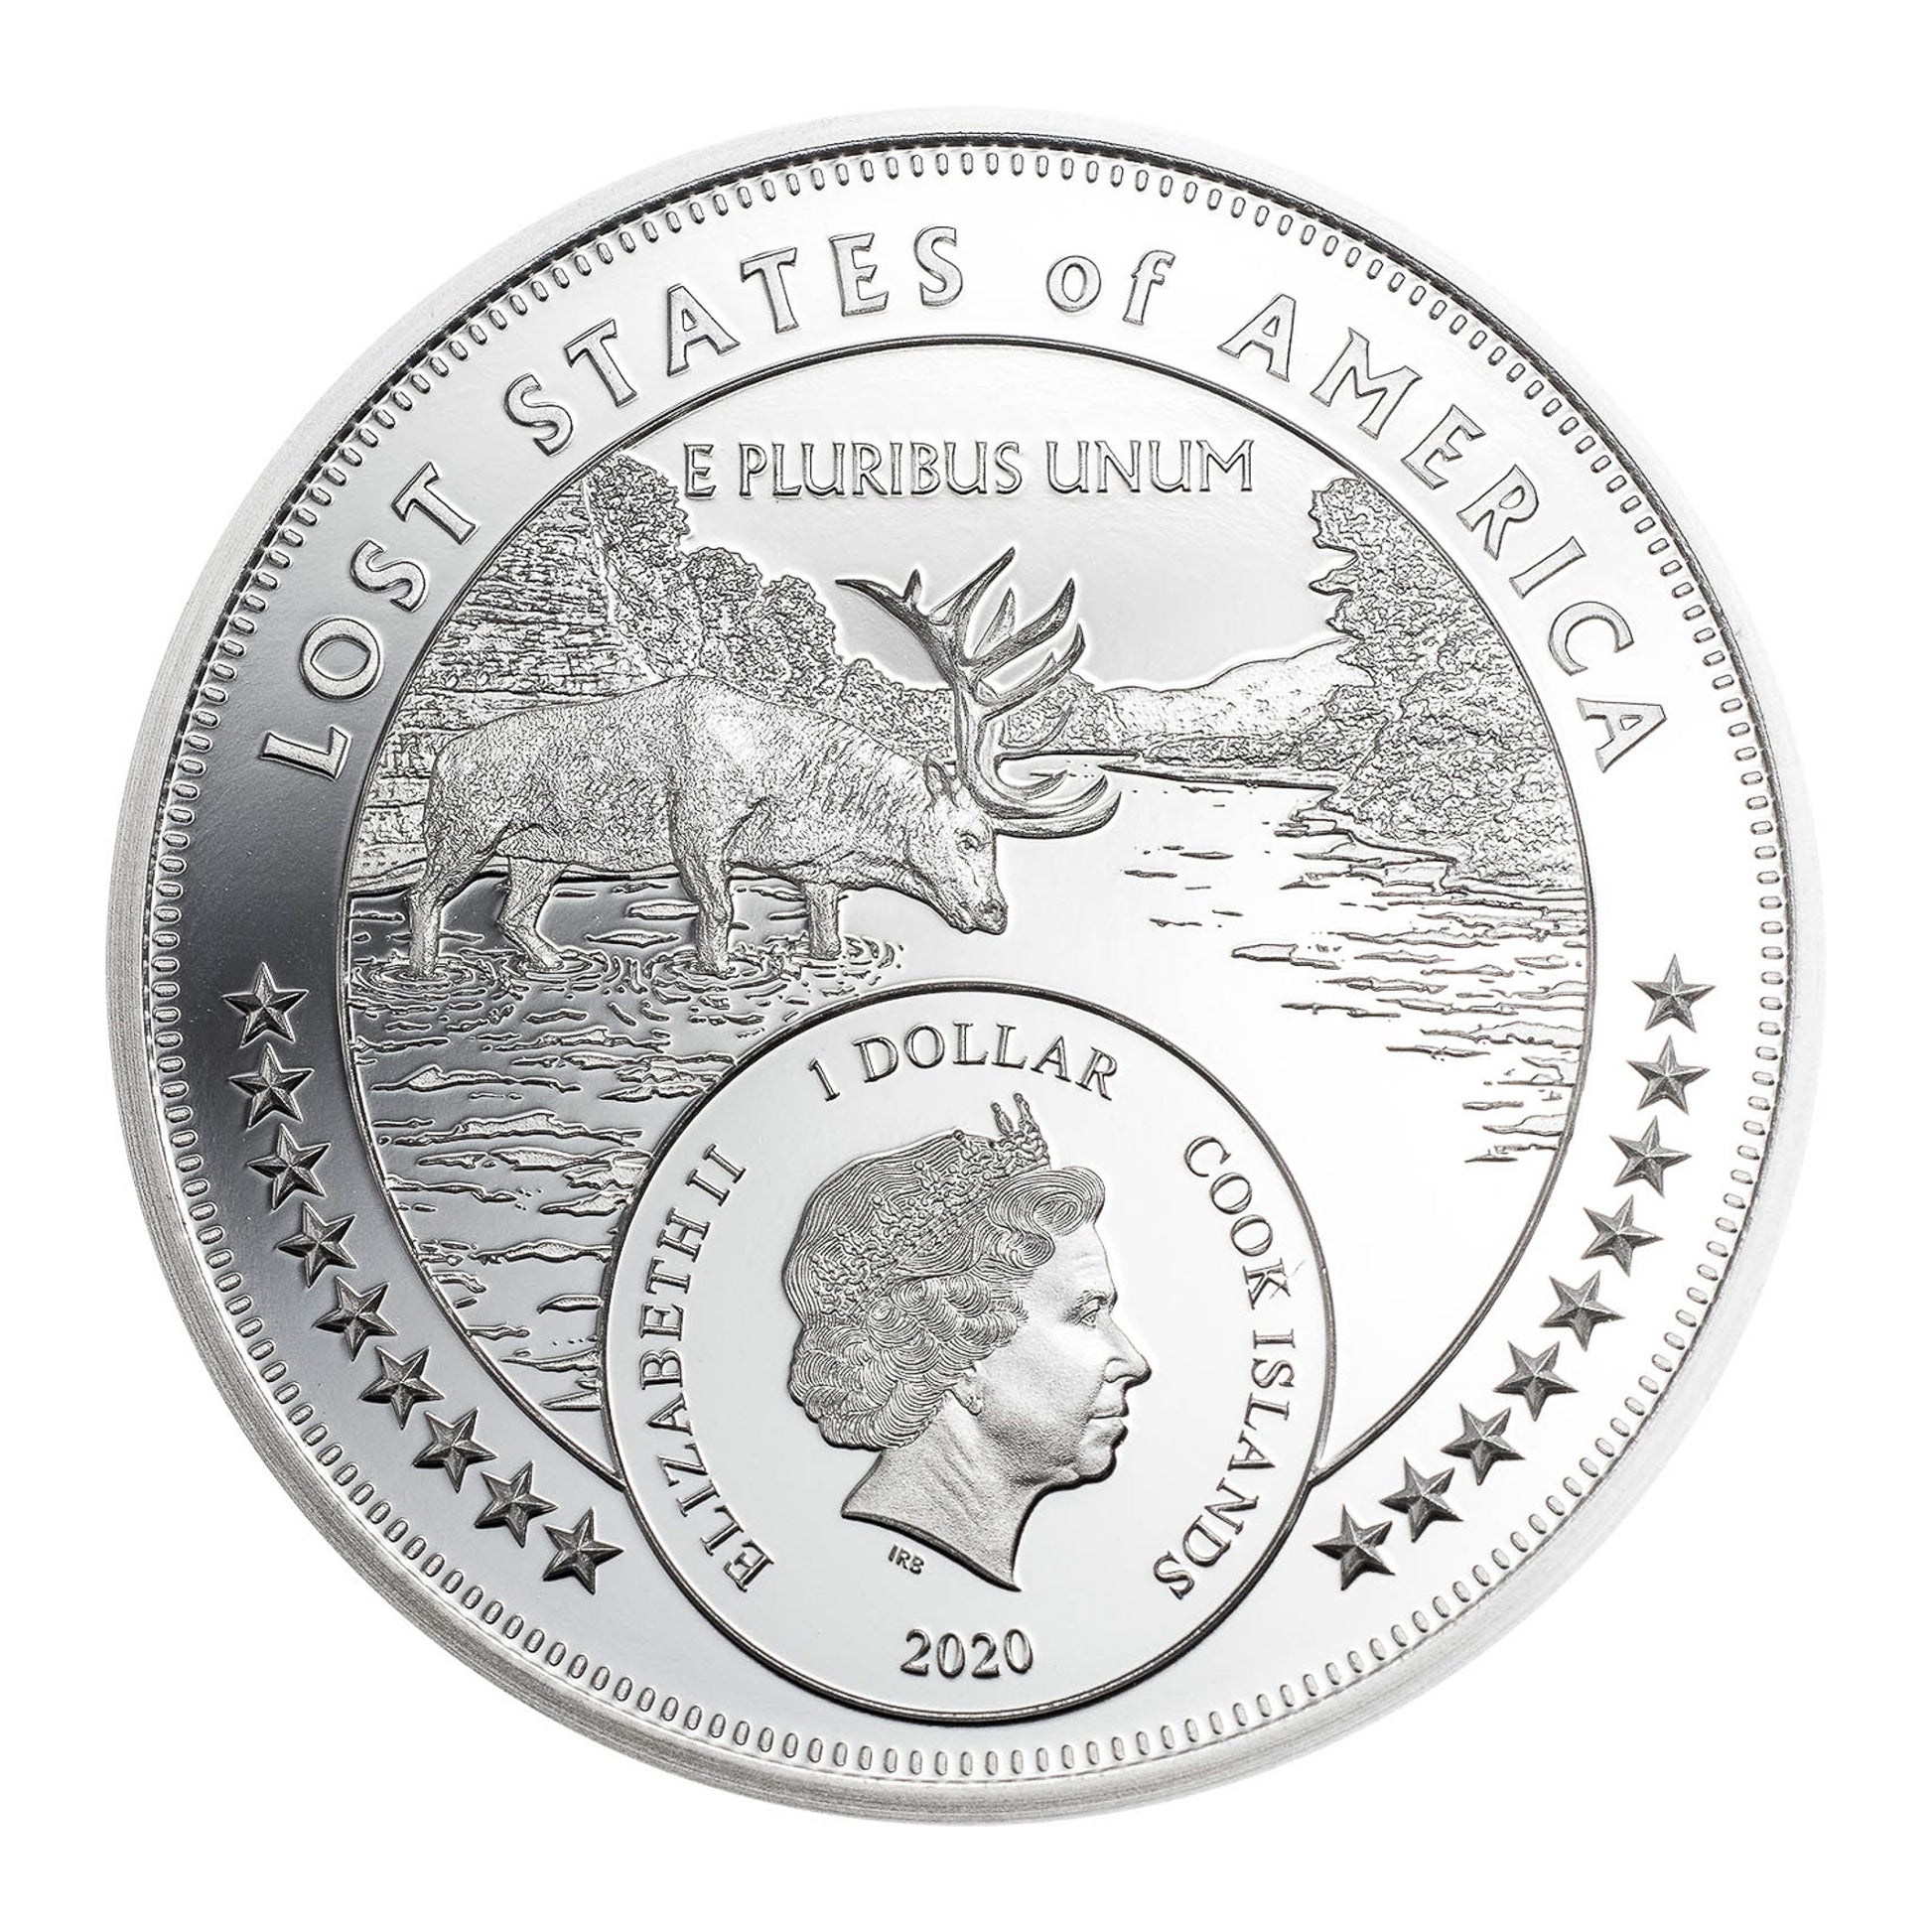 2020 Cook Island STATE OF FRANKLIN Lost States of America 1 oz Silver Coin - OZB